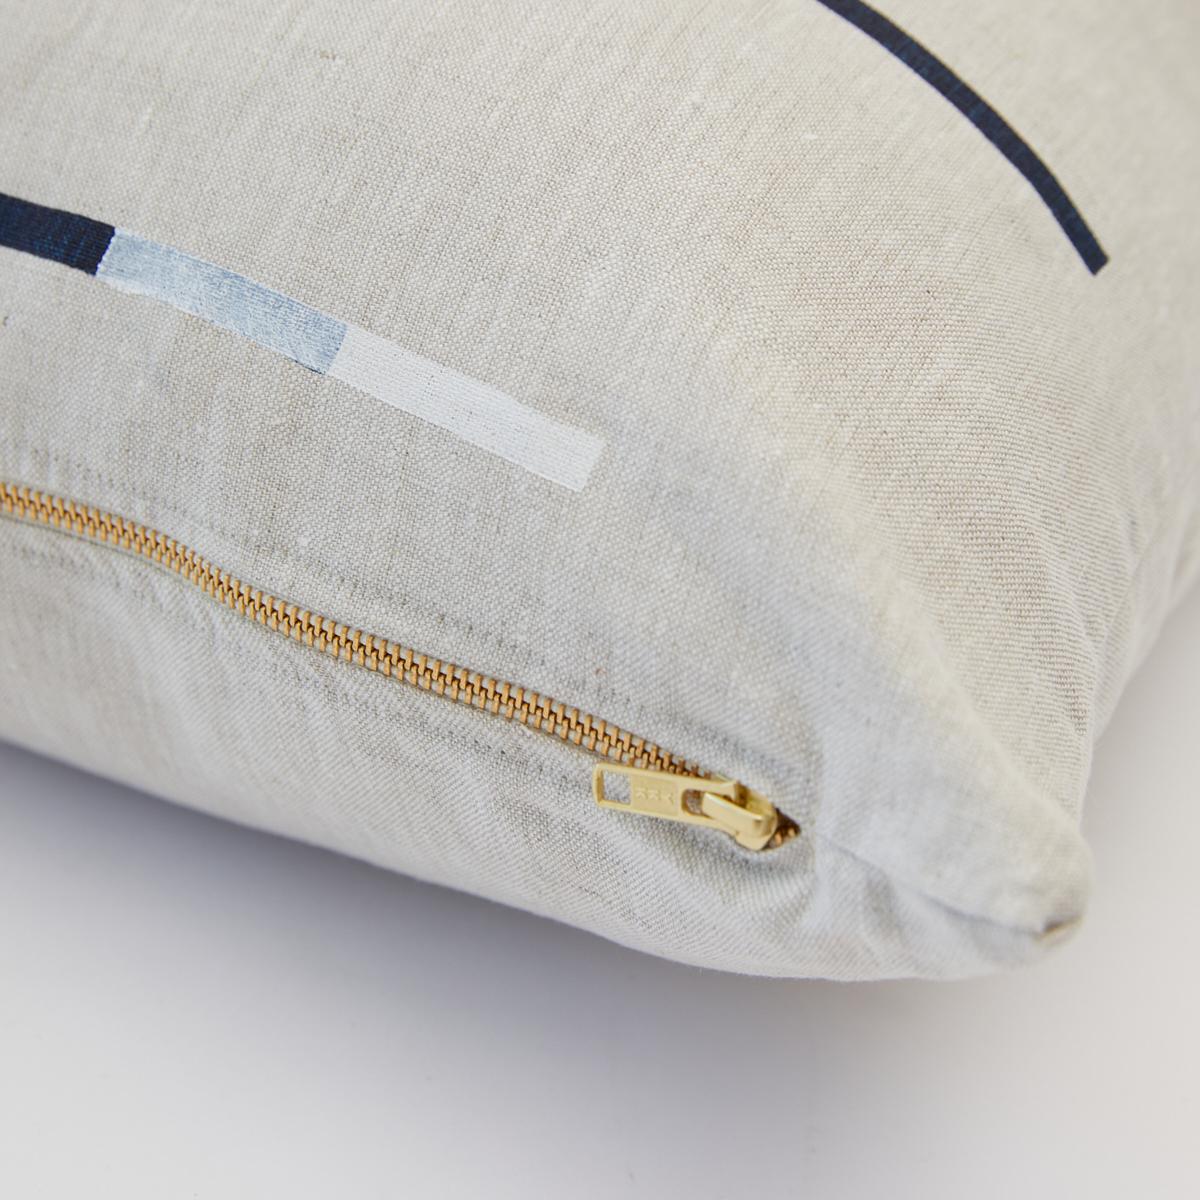 This pillow features Overlapping Dashes by Caroline Z Hurleywith a knife edge finish. Designed by Caroline Z Hurley in her Brooklyn studio and block-printed in New Bedford, Massachusetts. Each shape is cut and individually stamped onto the linen by